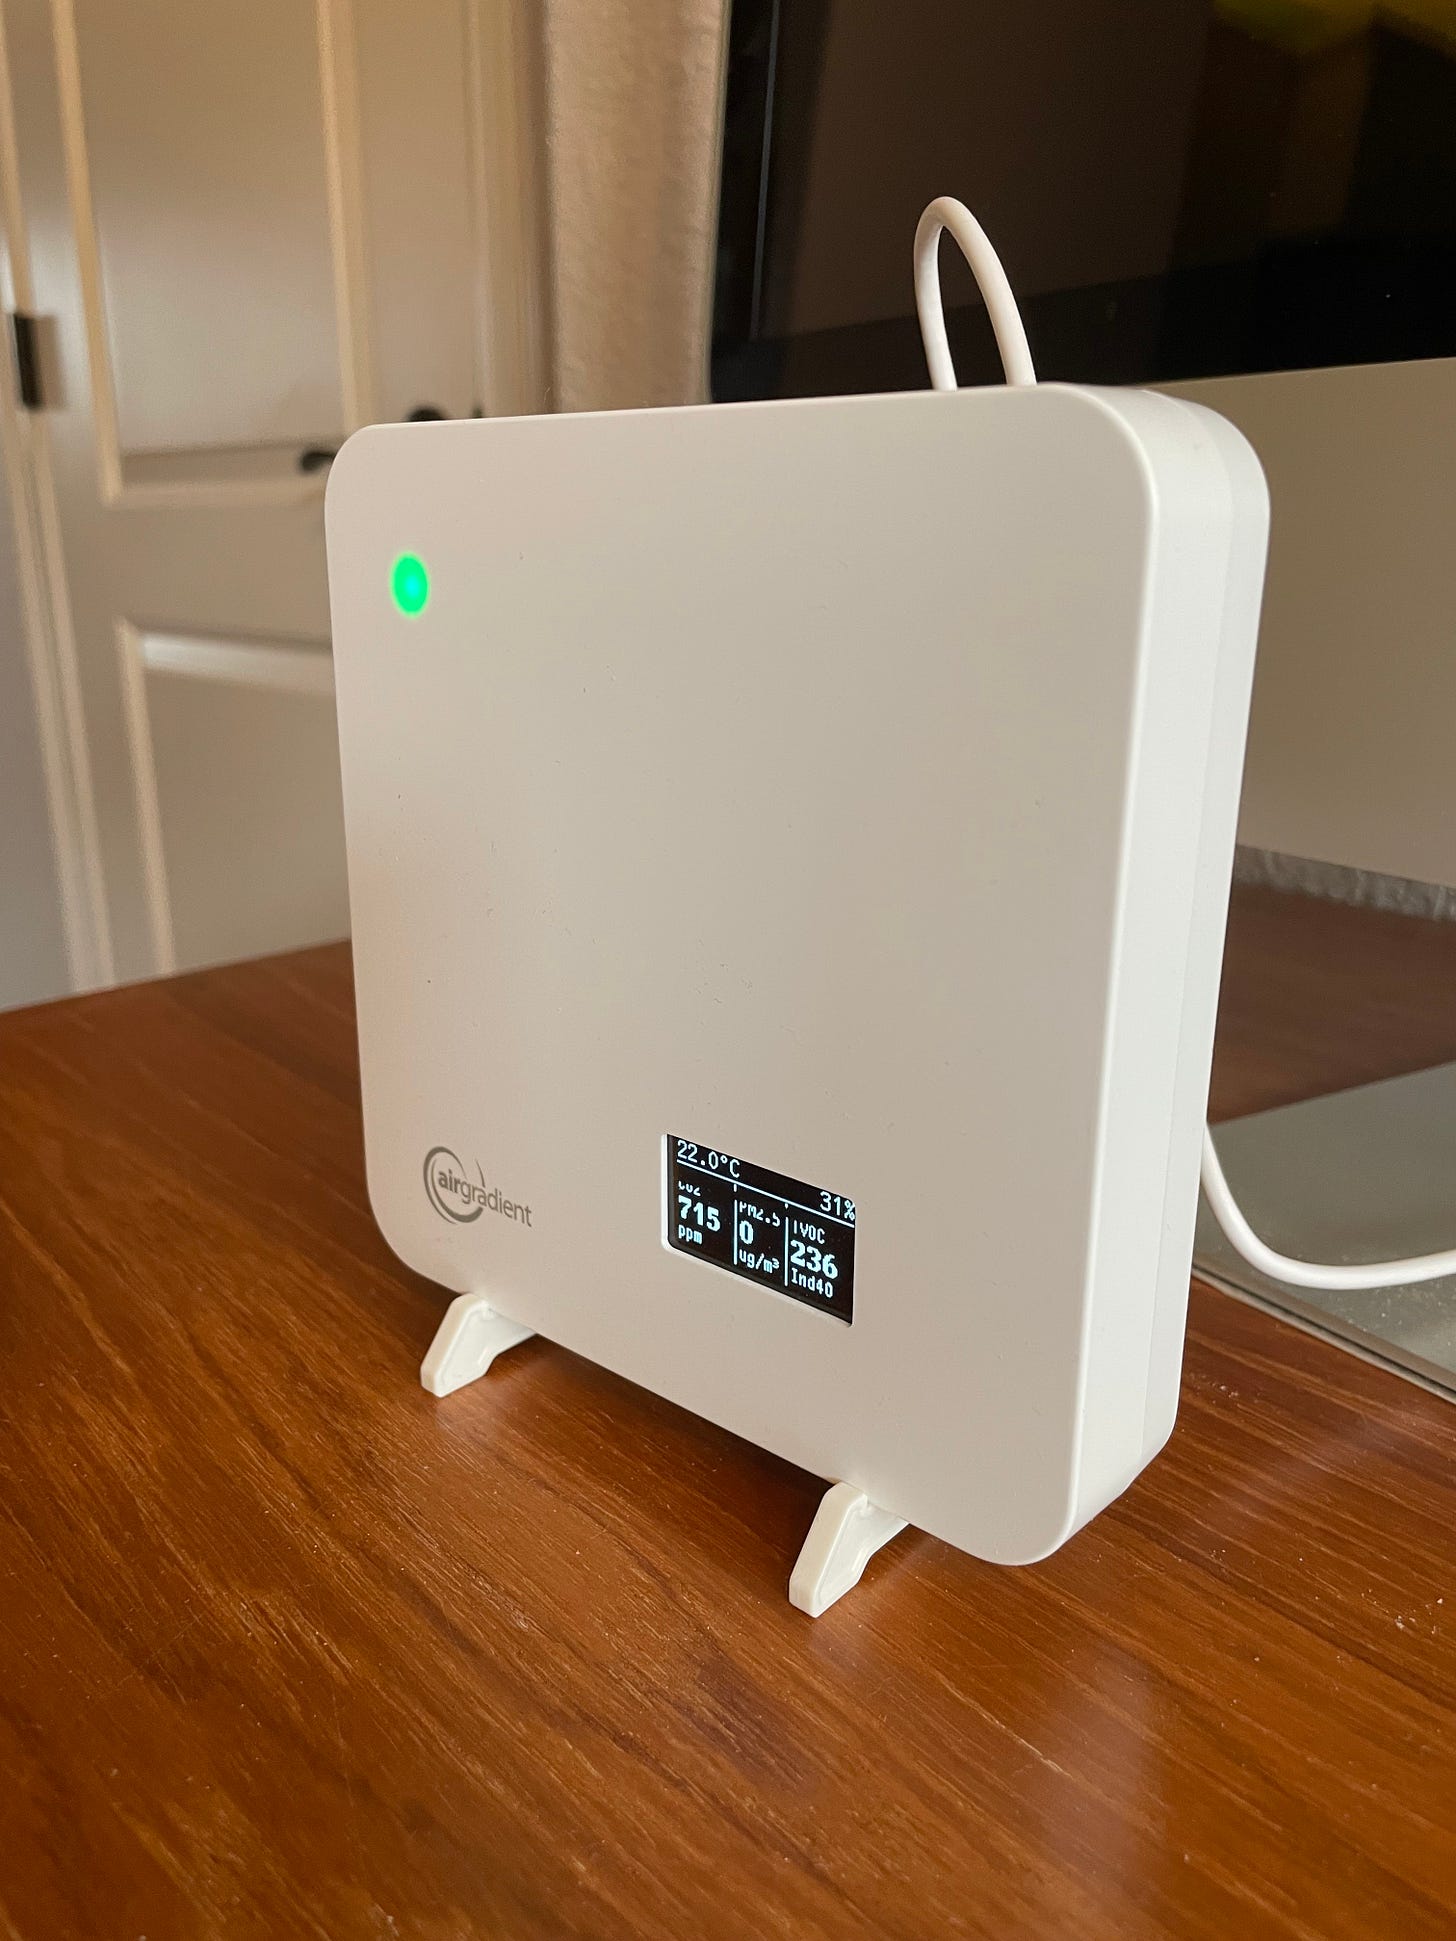 AirGradient One indoor air quality monitor